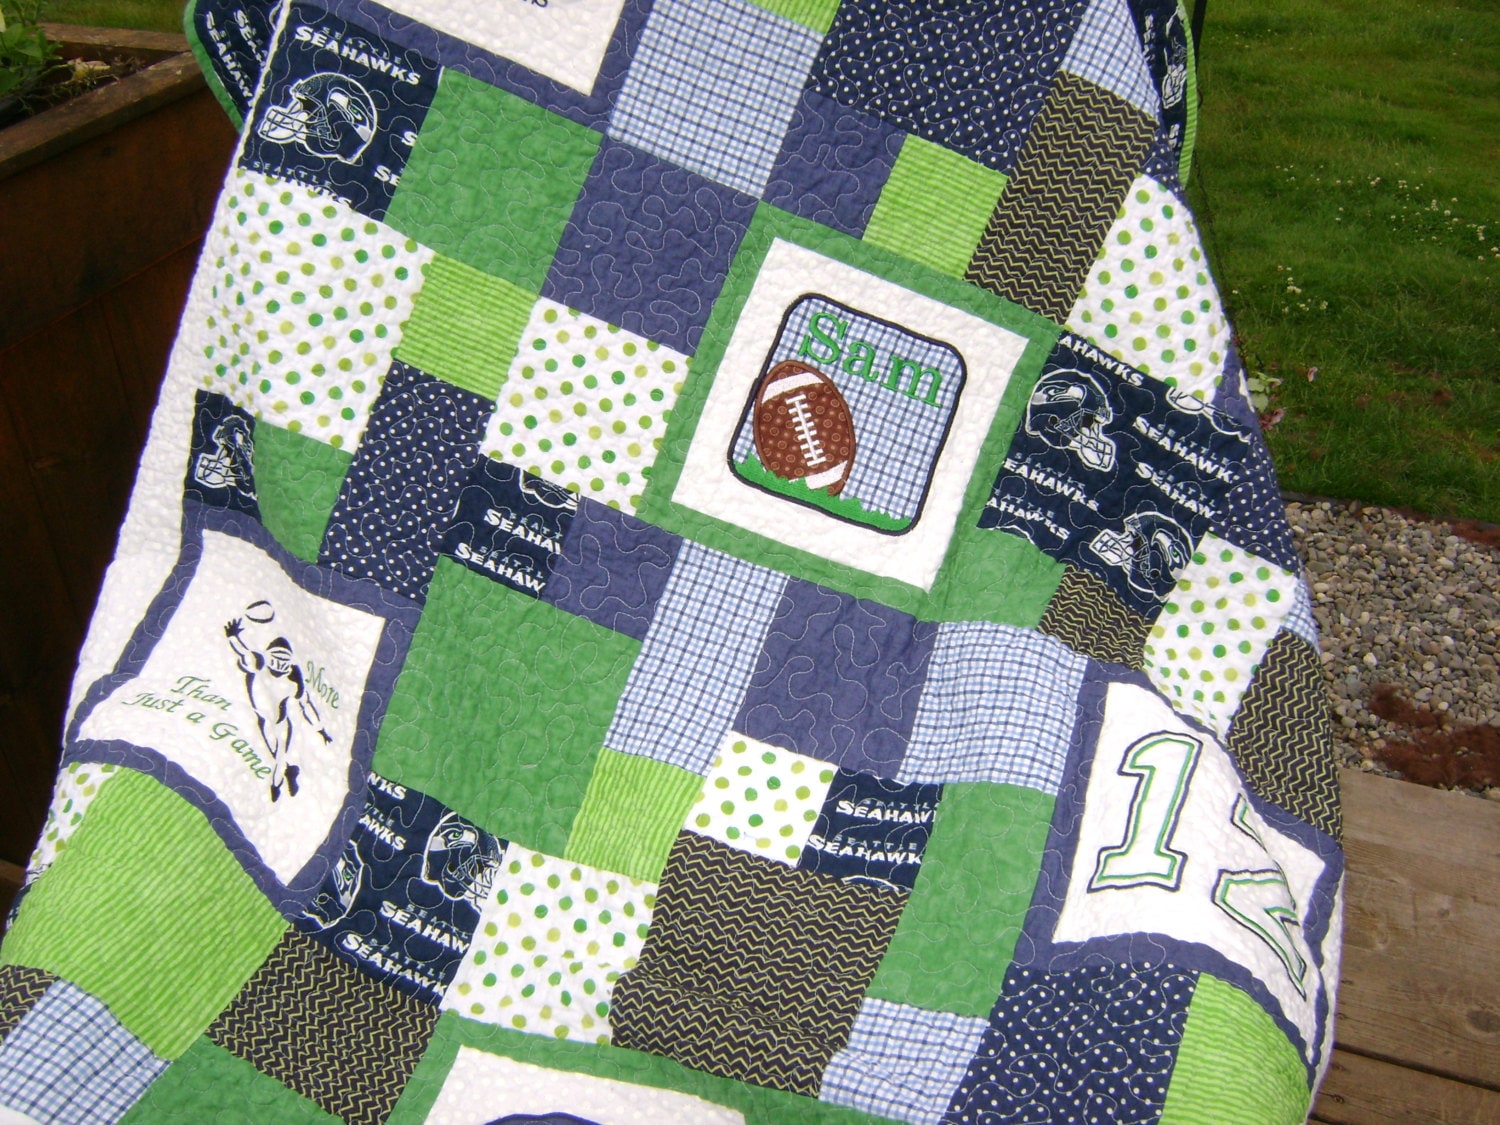 Have it Your Way Quilt Pattern ~ great pattern to make stunning team quilts, GO hawks!!